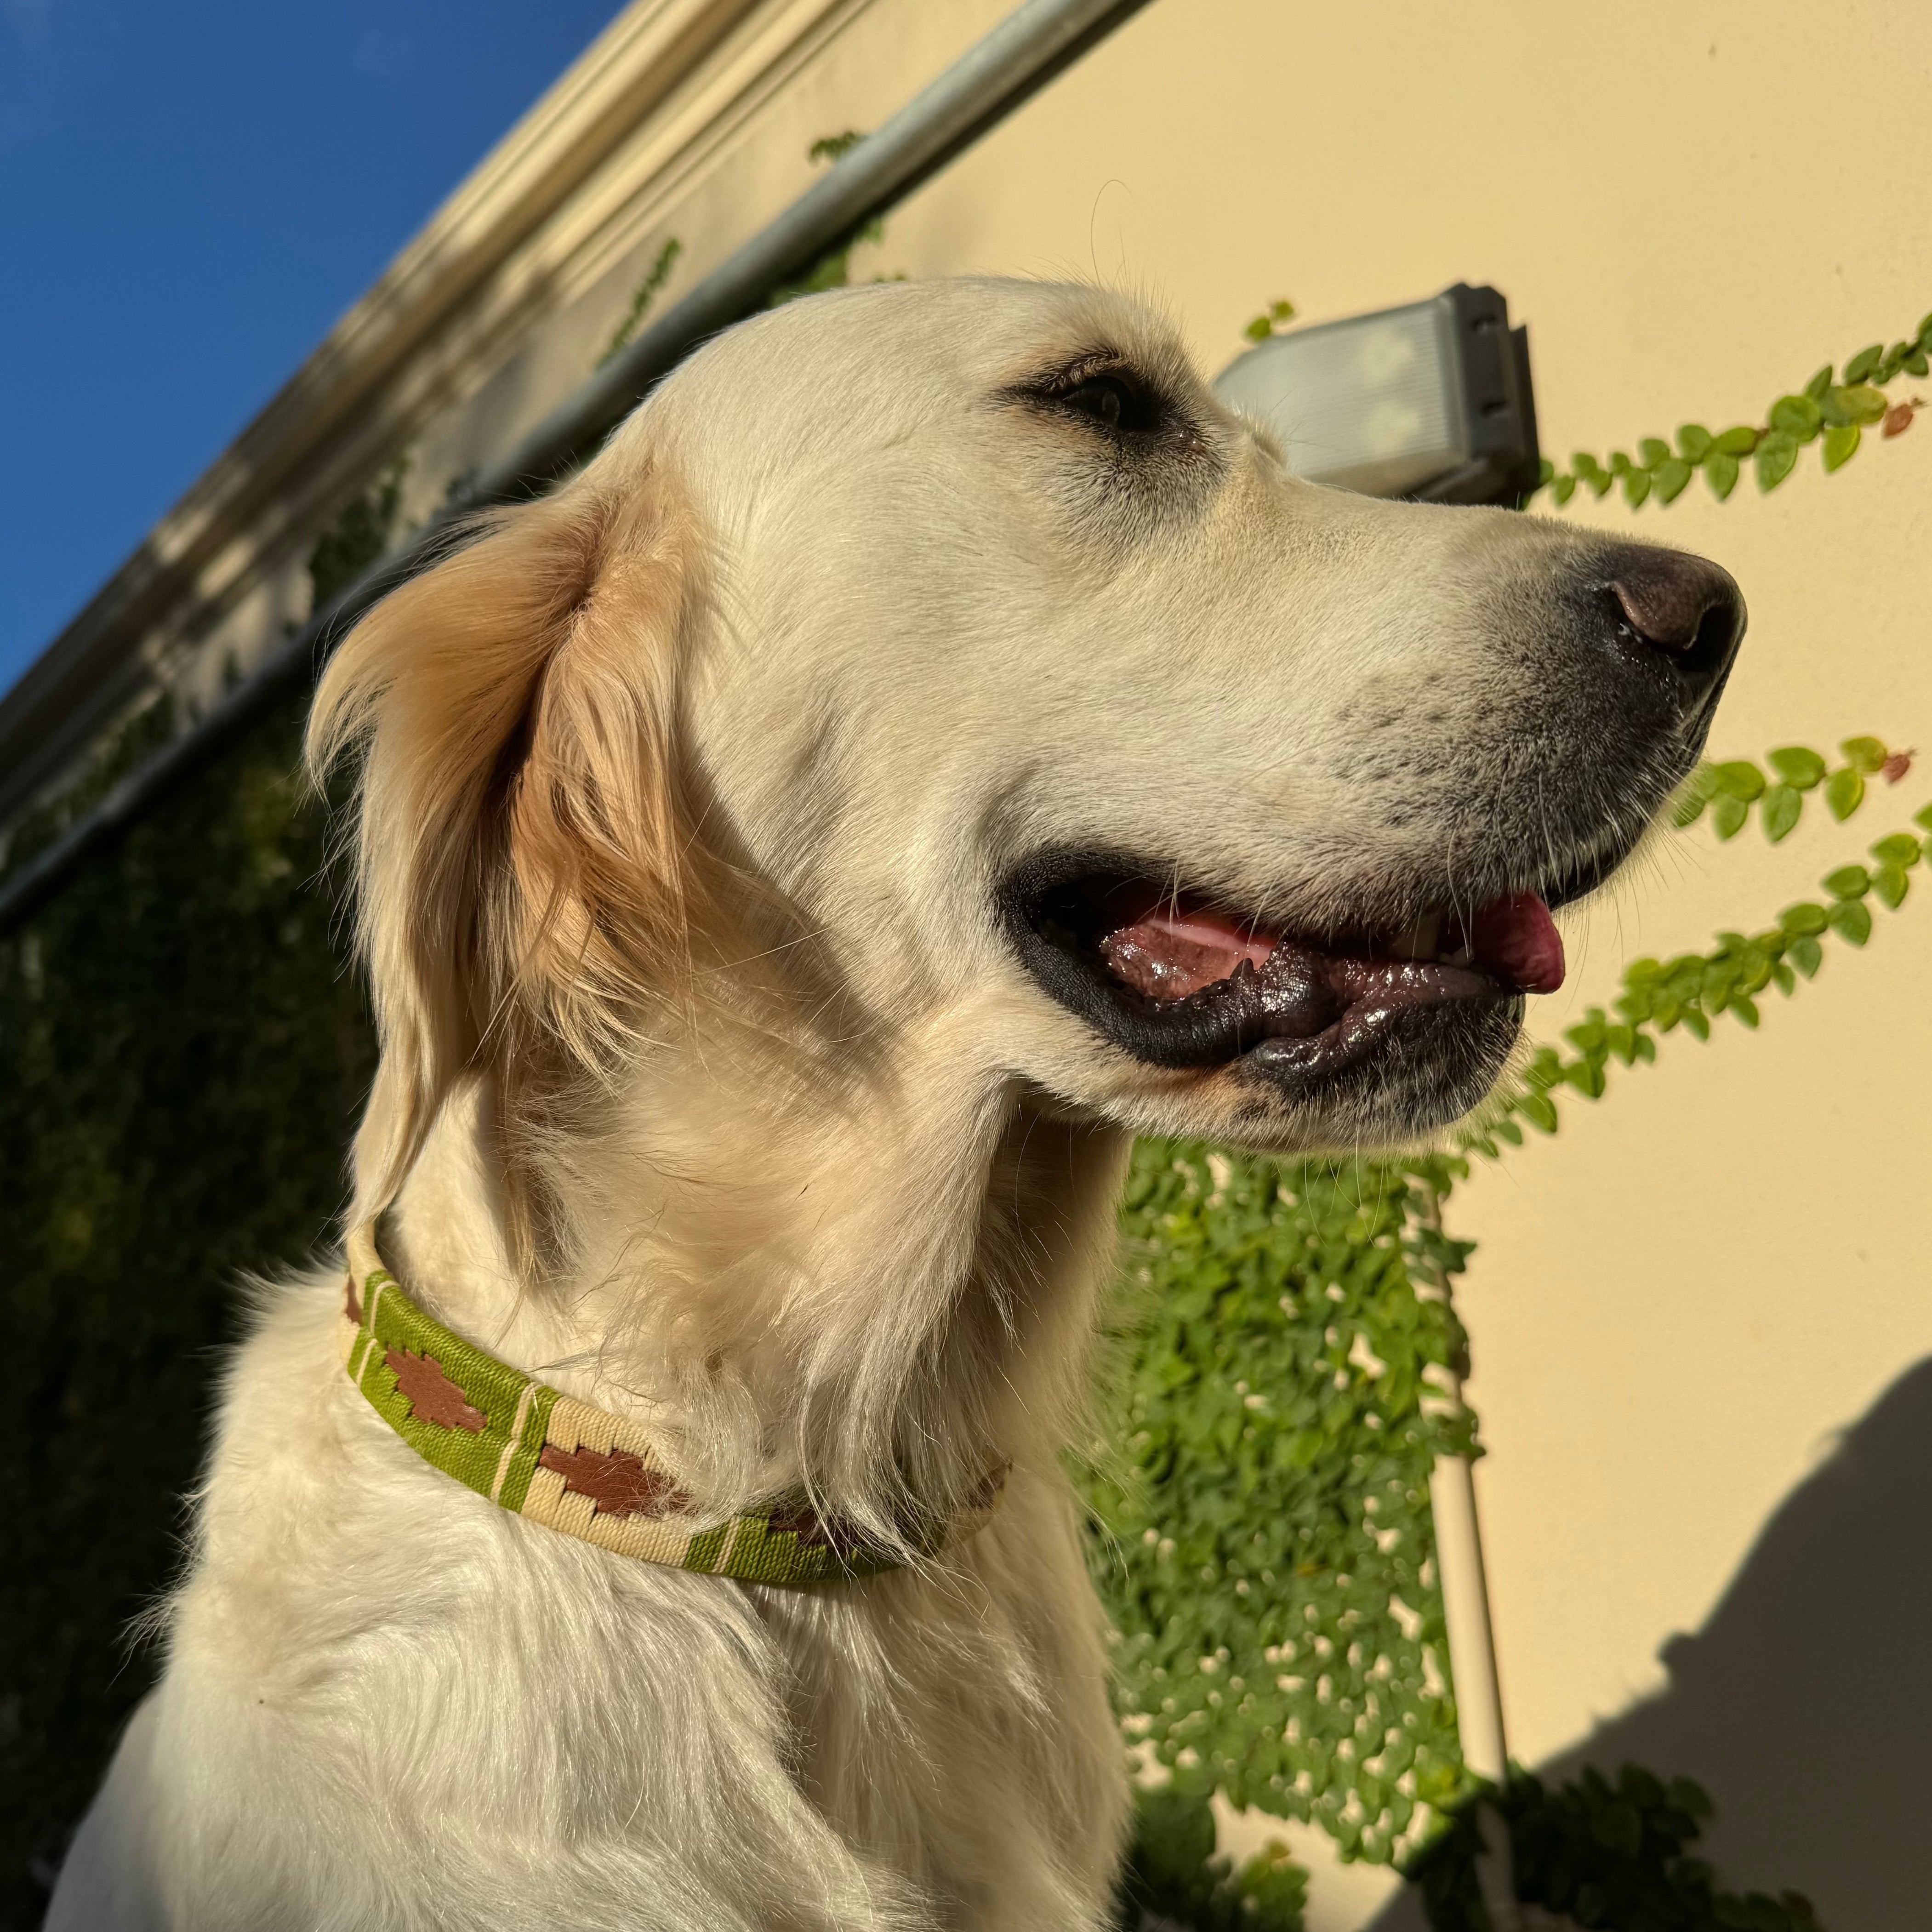 A golden retriever with light-colored fur is wearing a green Polo Collar - Patrick by Georgie Paws while sitting outside. The dog is facing to the right, its mouth slightly open. The background shows a beige wall with green ivy climbing up it, and the sun casting a shadow, suggesting it is late afternoon.